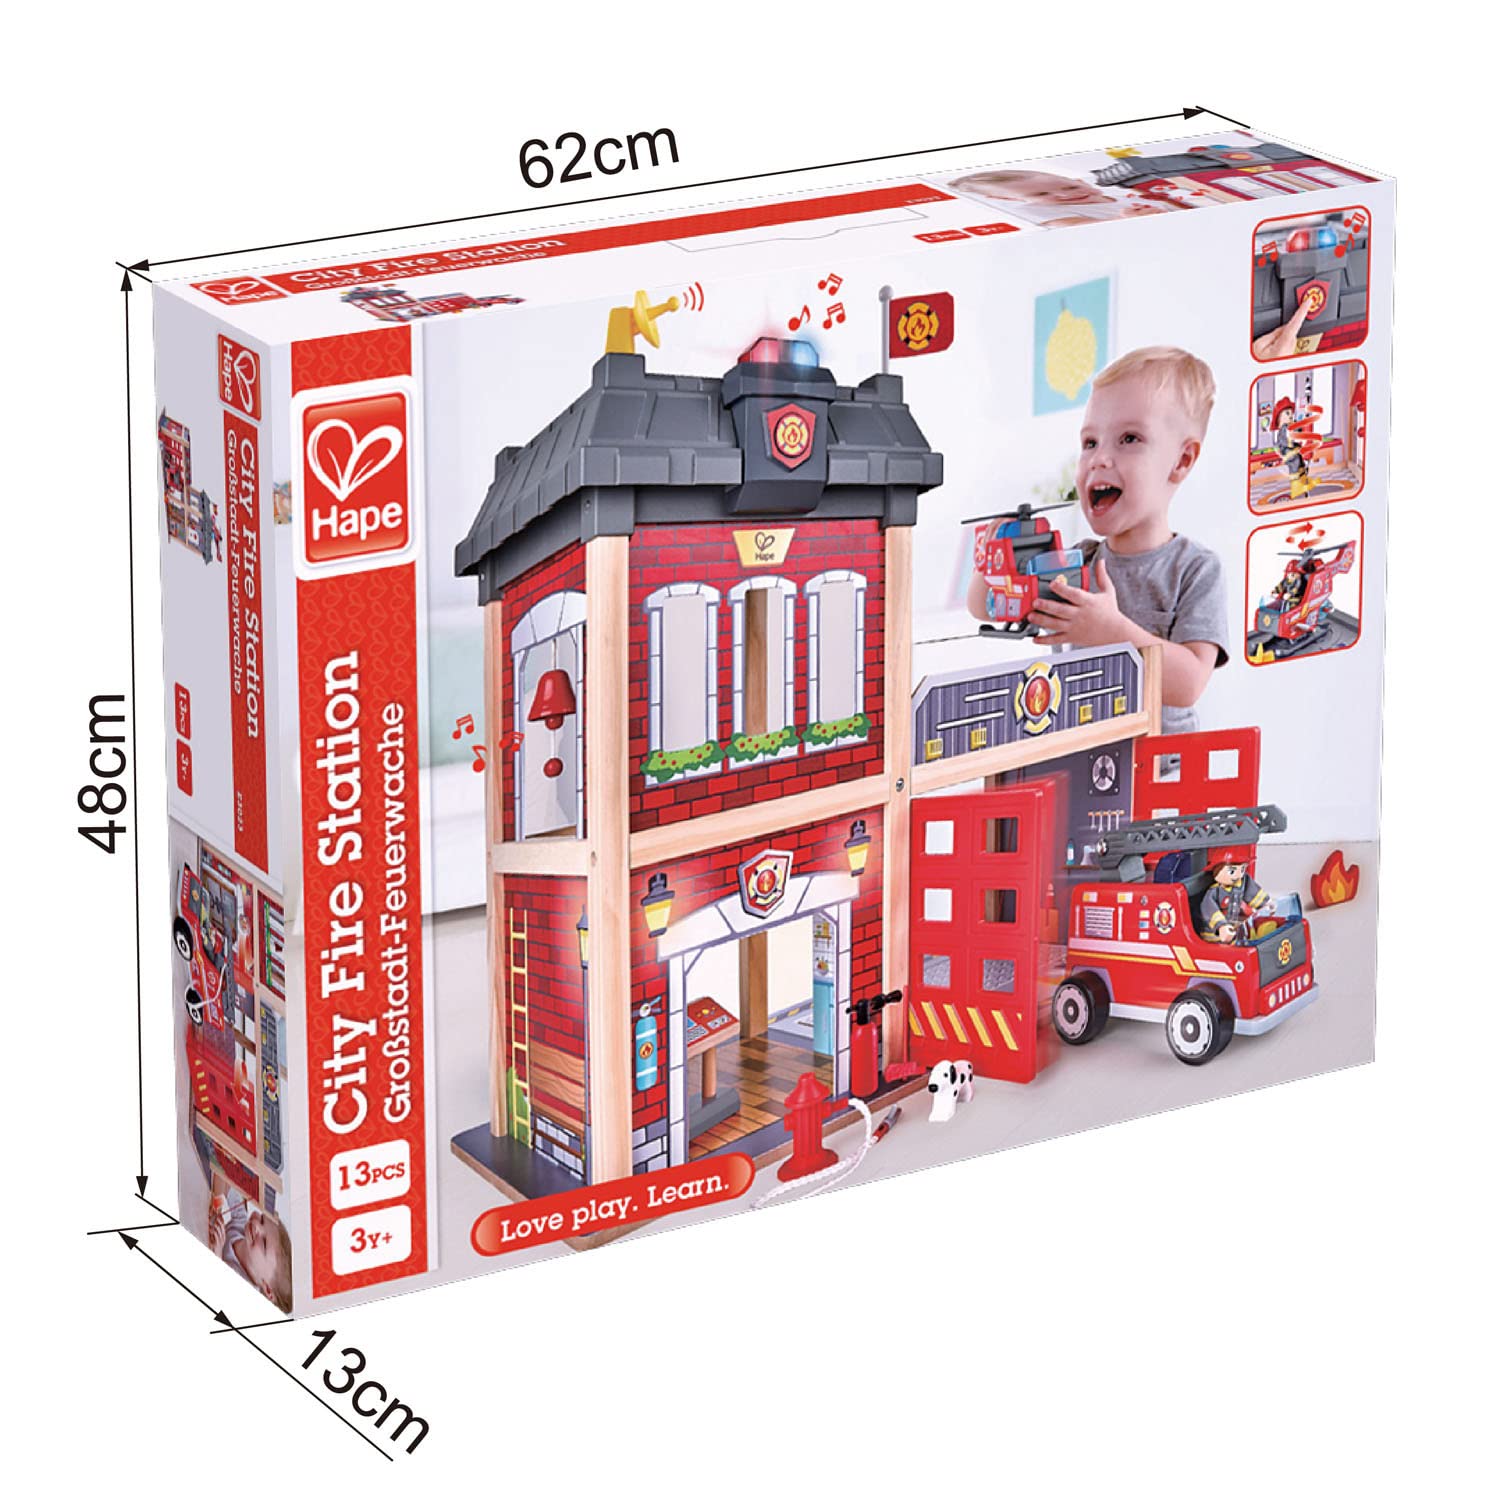 Hape Fire Station Playset| Wooden Dollhouse Kid’s Toy, Stimulates Key Motor Skills And Promotes Team Play (E3023) Multicolor, L: 23.6, W: 11.8, H: 18.8 inch